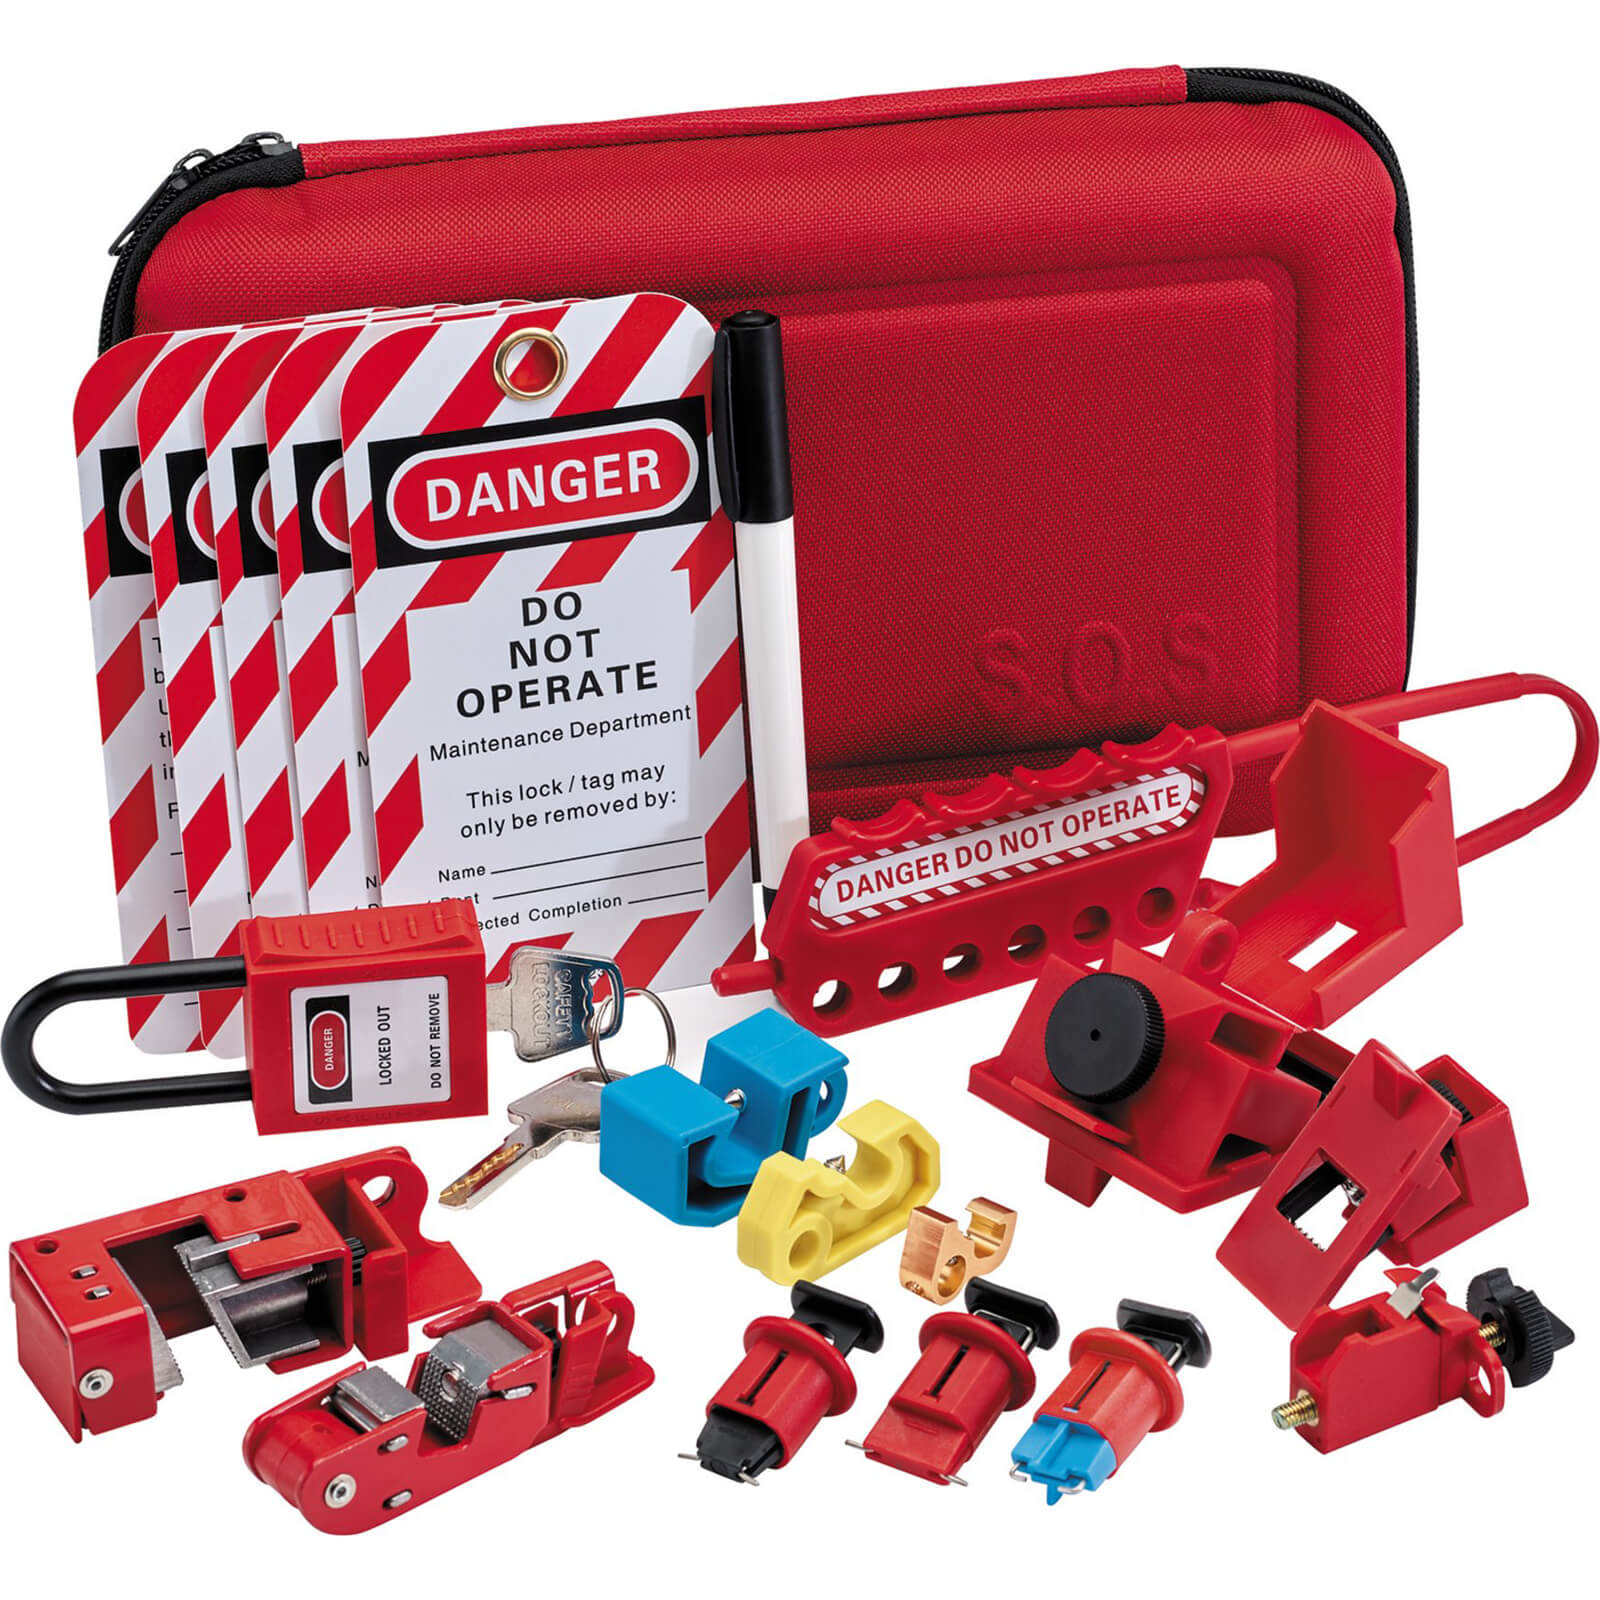 Image of Draper Electricians Safety Lockout Kit in Carry Case